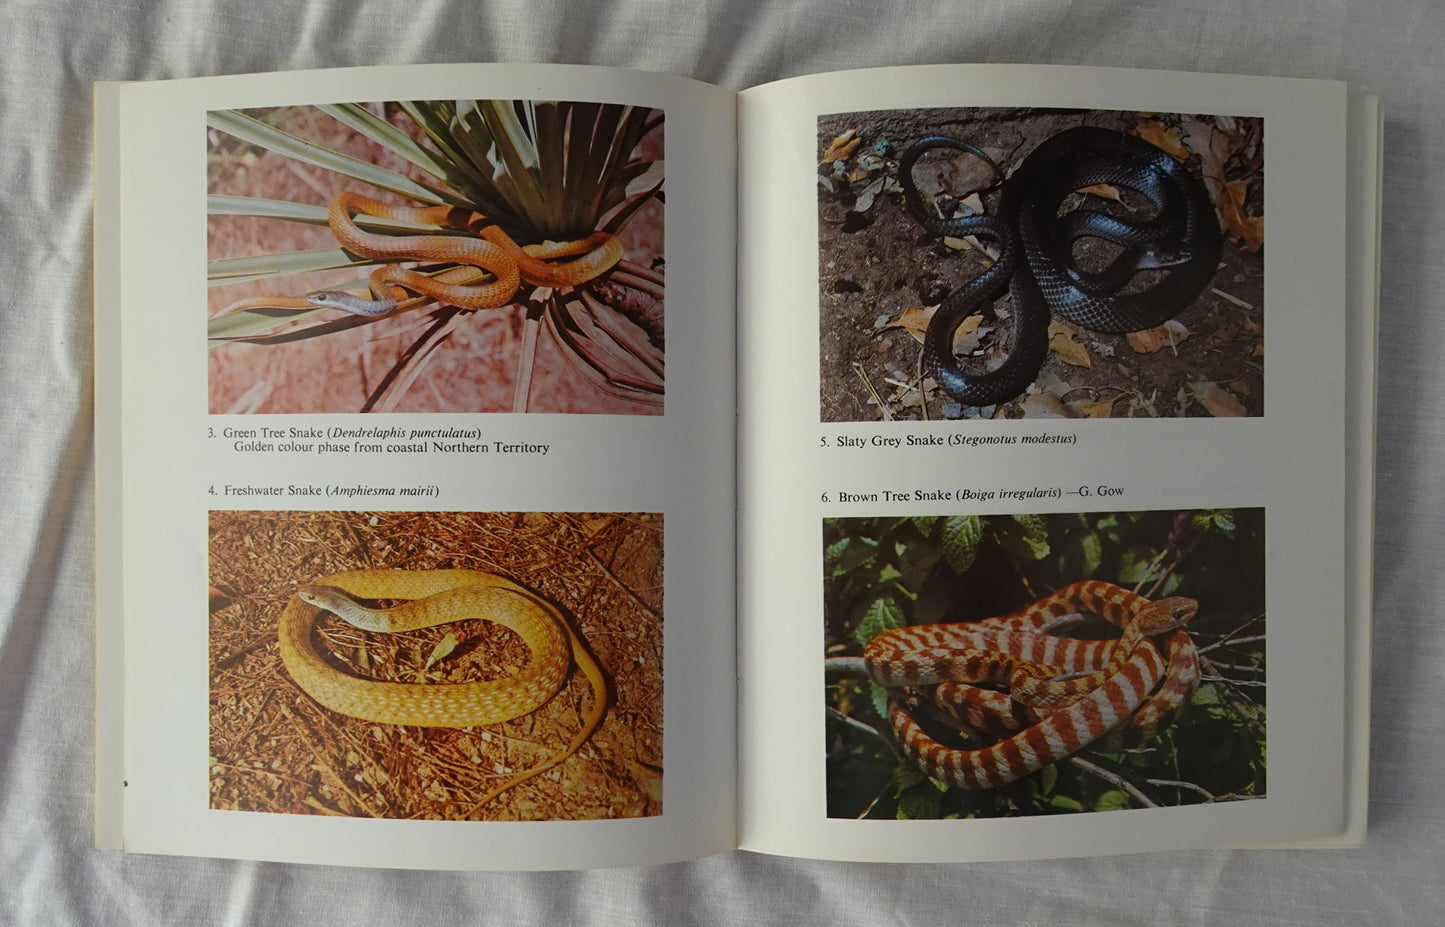 Snakes & Lizards of Australia by Graeme F. Gow and Stephen Swanson